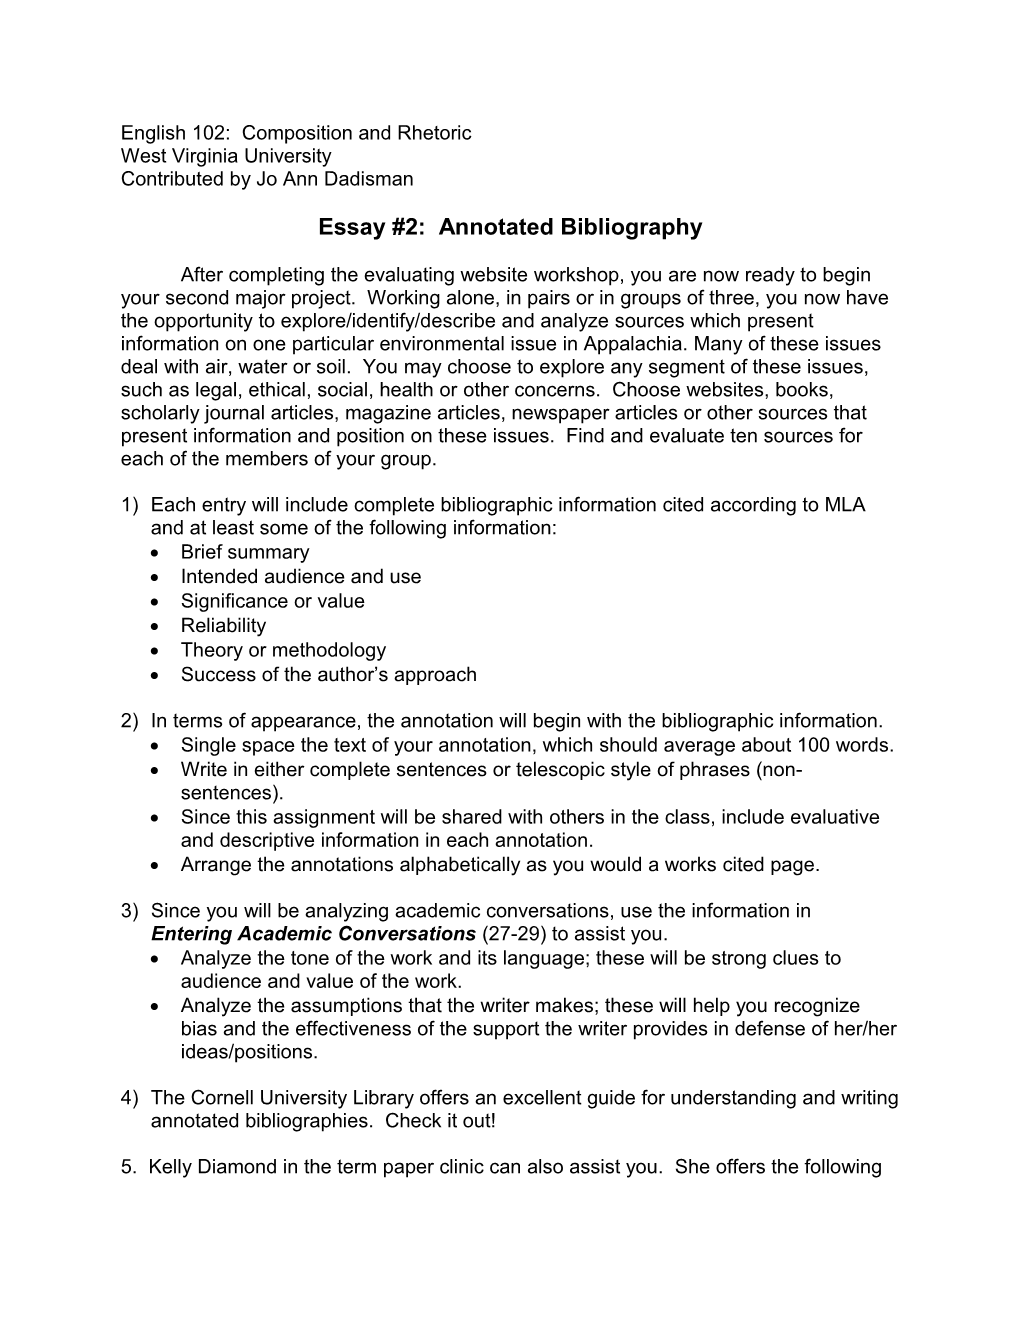 Annotated Bibliography: Essay #2